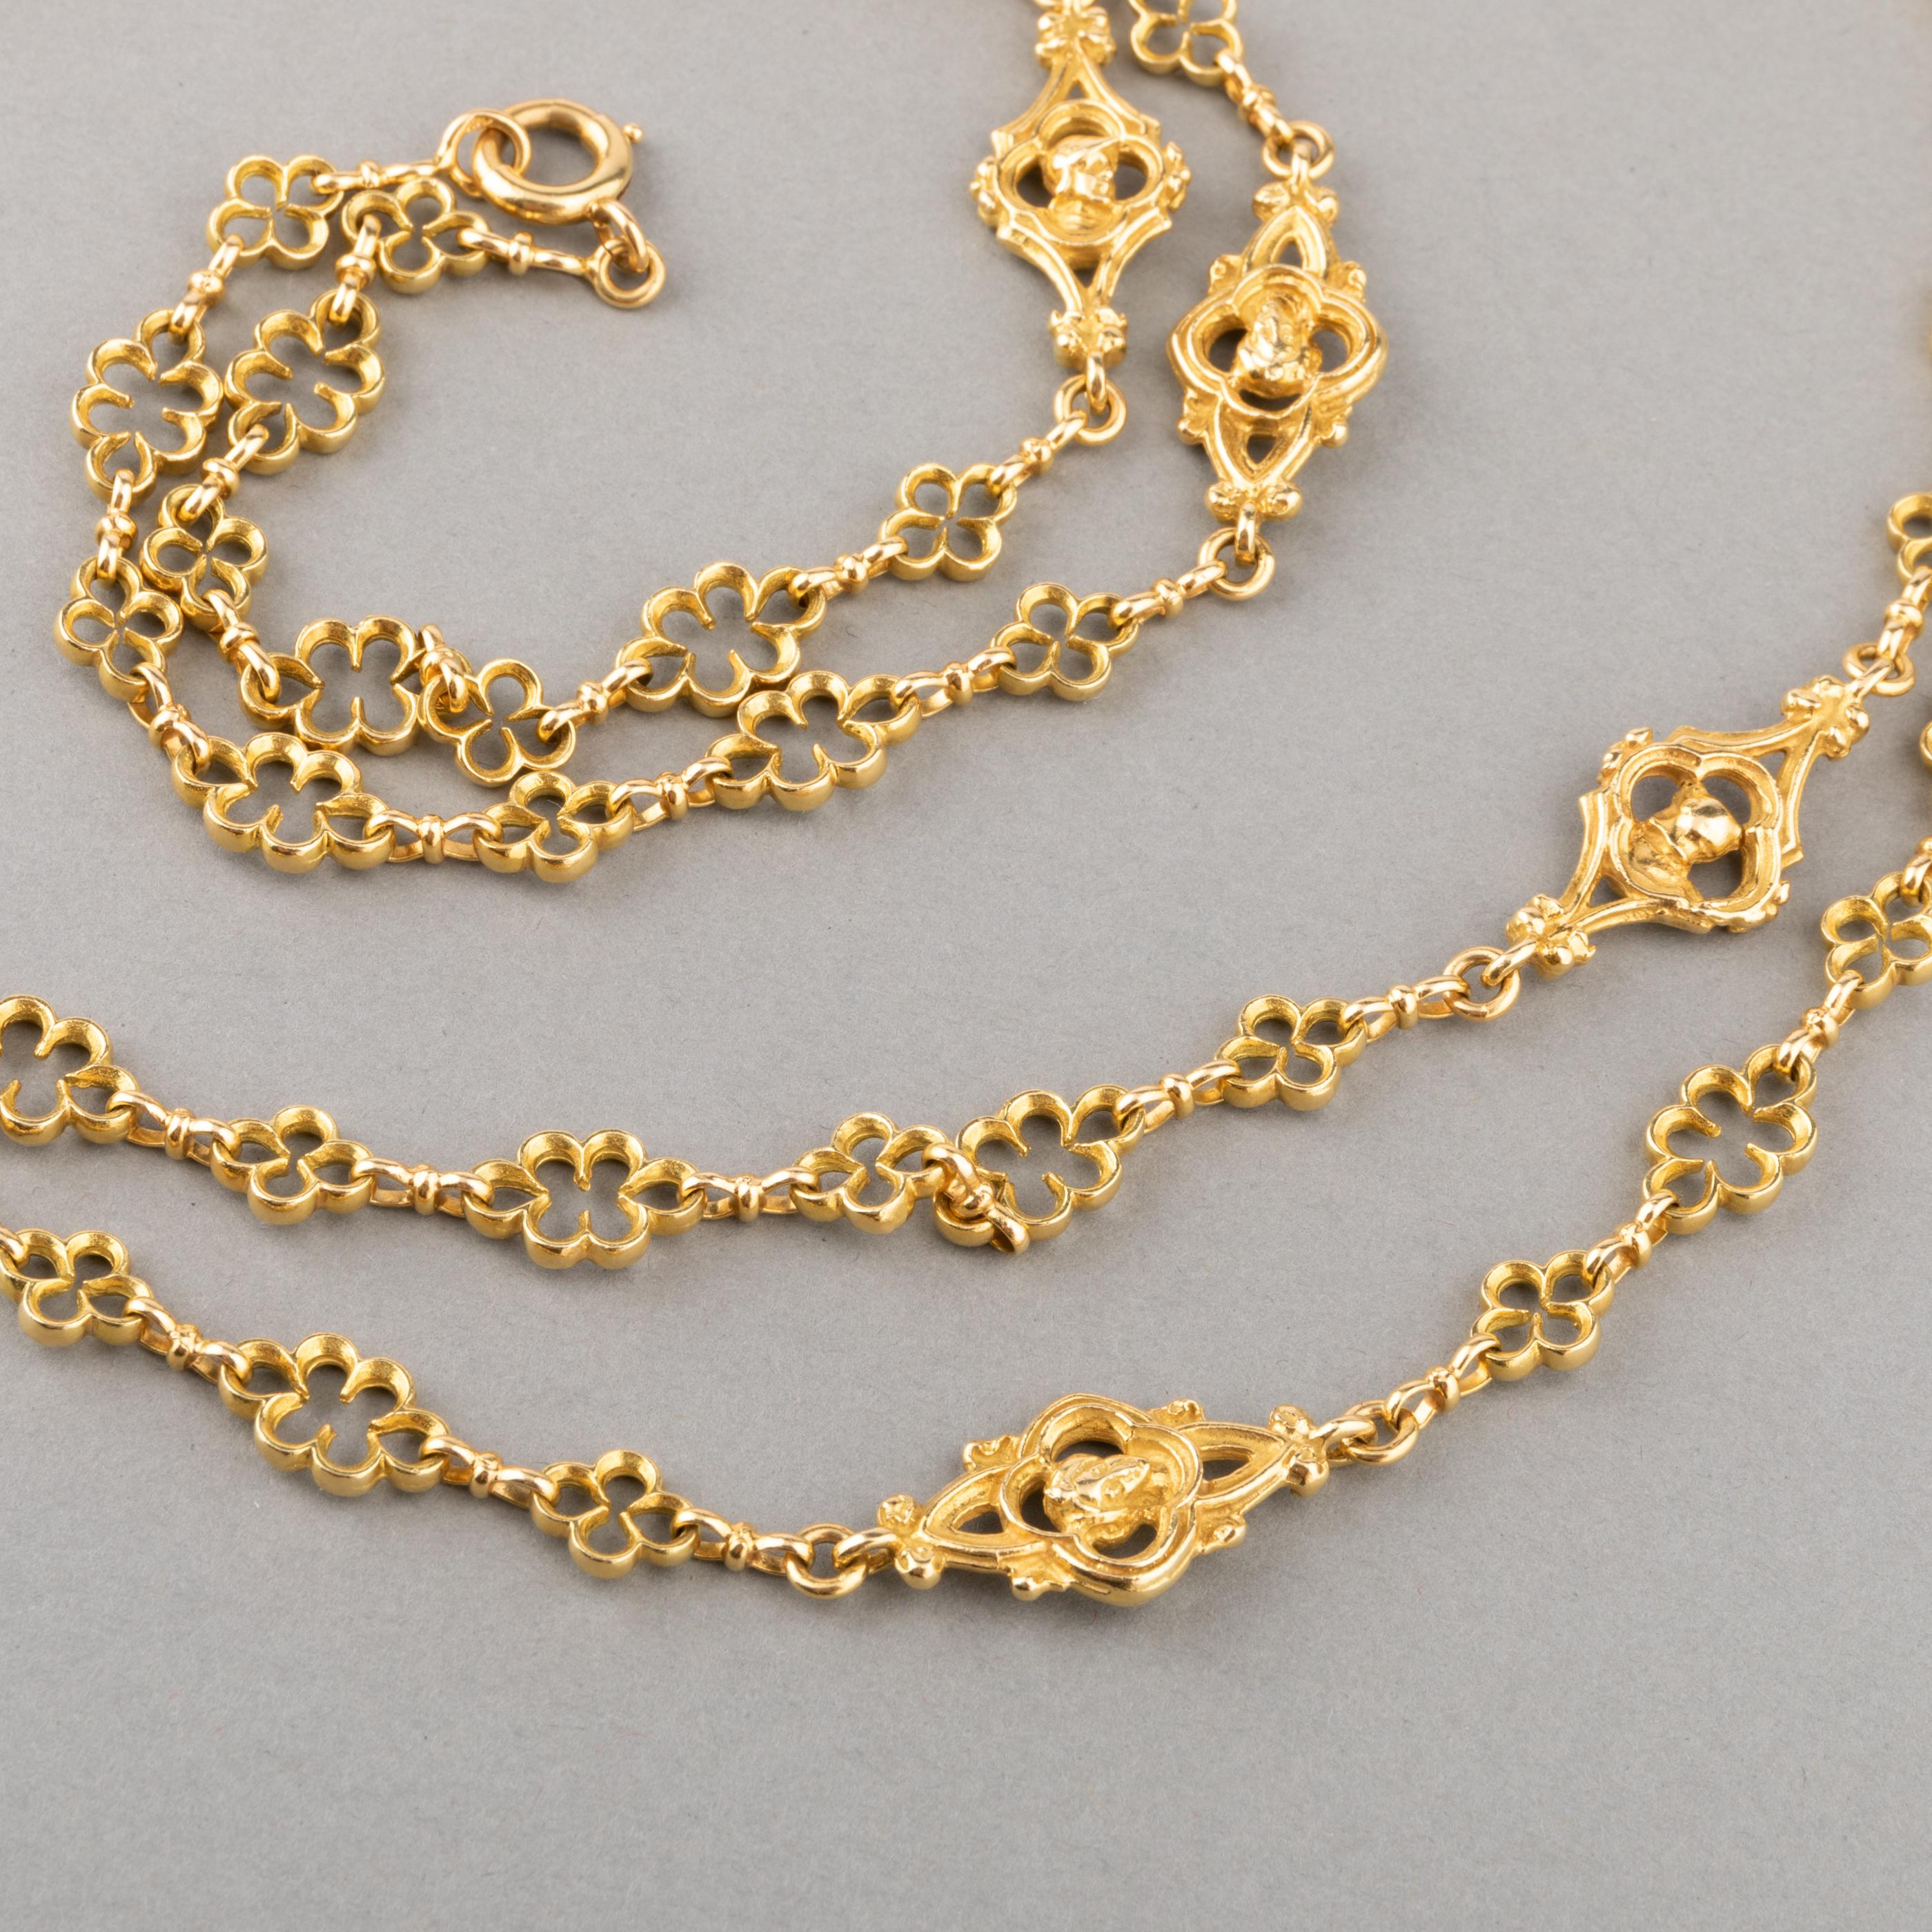 Women's or Men's Antique 19th Century Long French Necklace For Sale